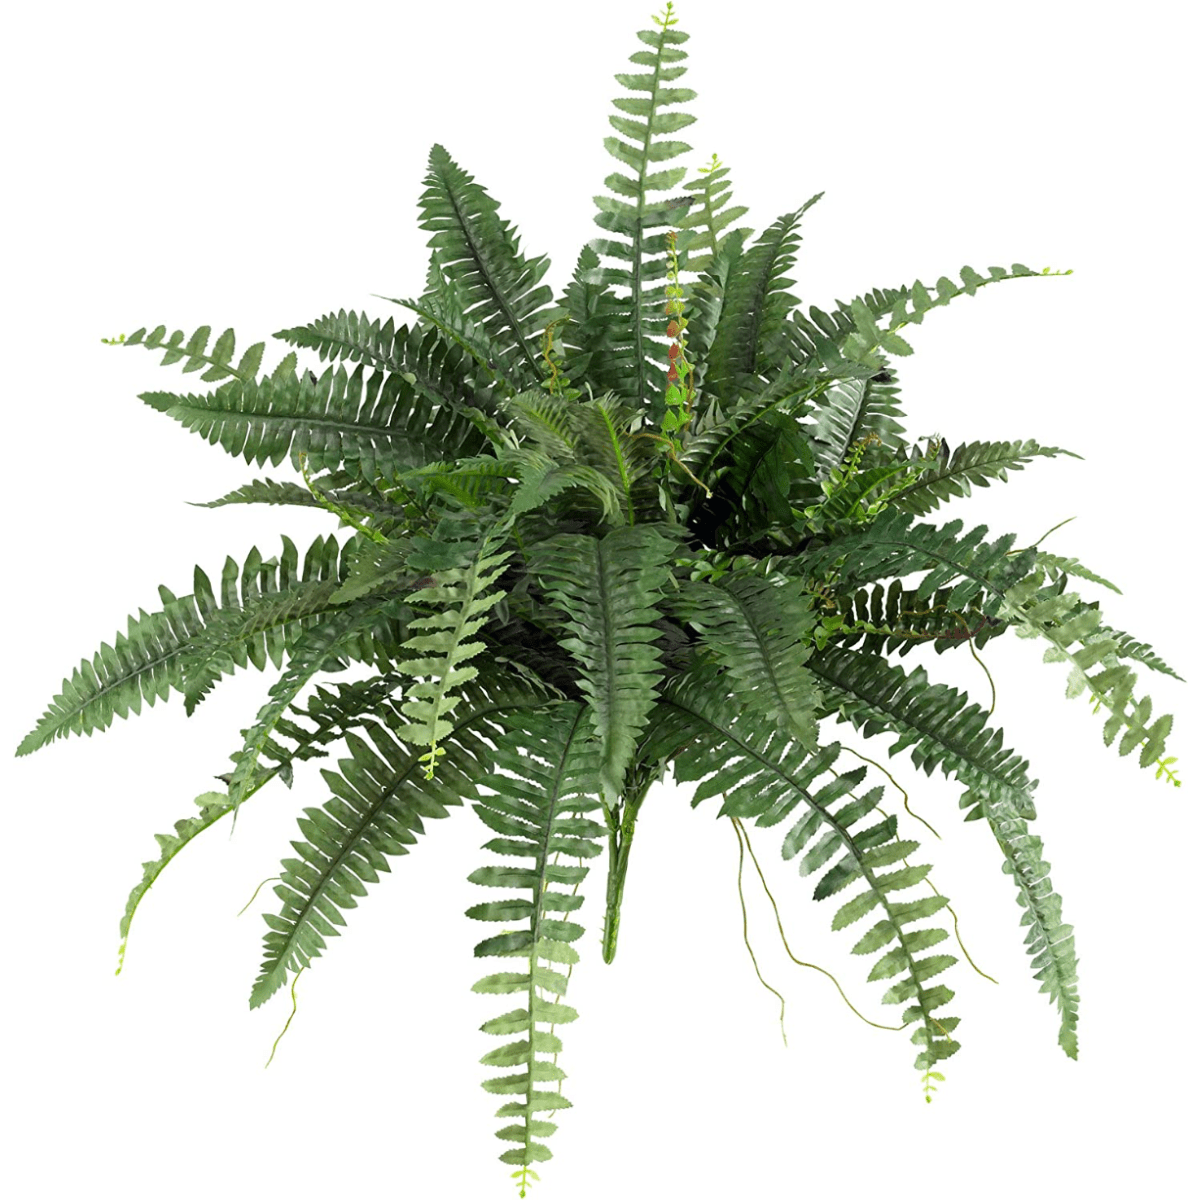 Nearly Natural Boston Fern with Decorative Wood Vase Silk Plant Green